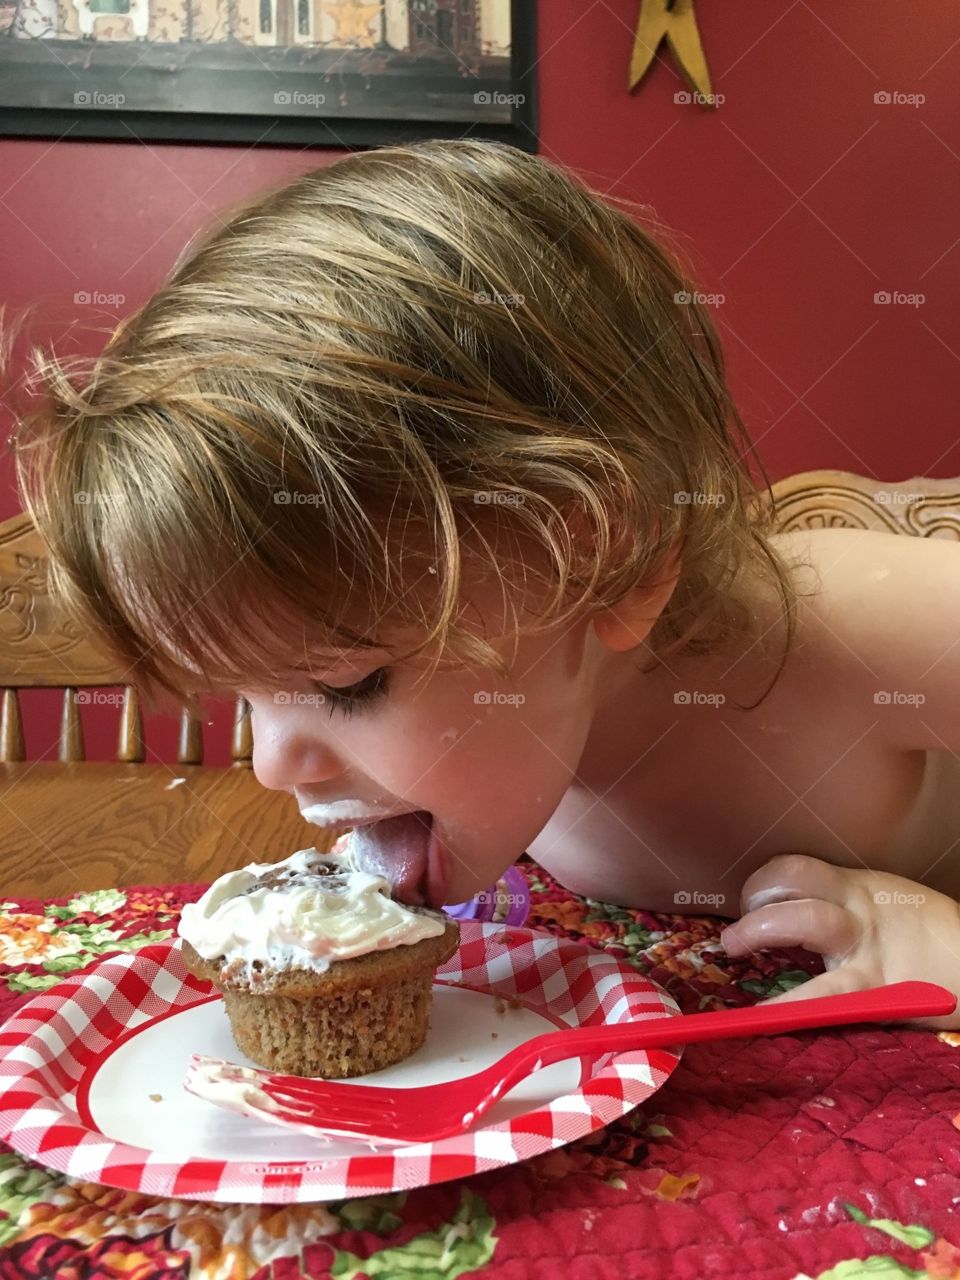 The correct way to eat a cupcake!